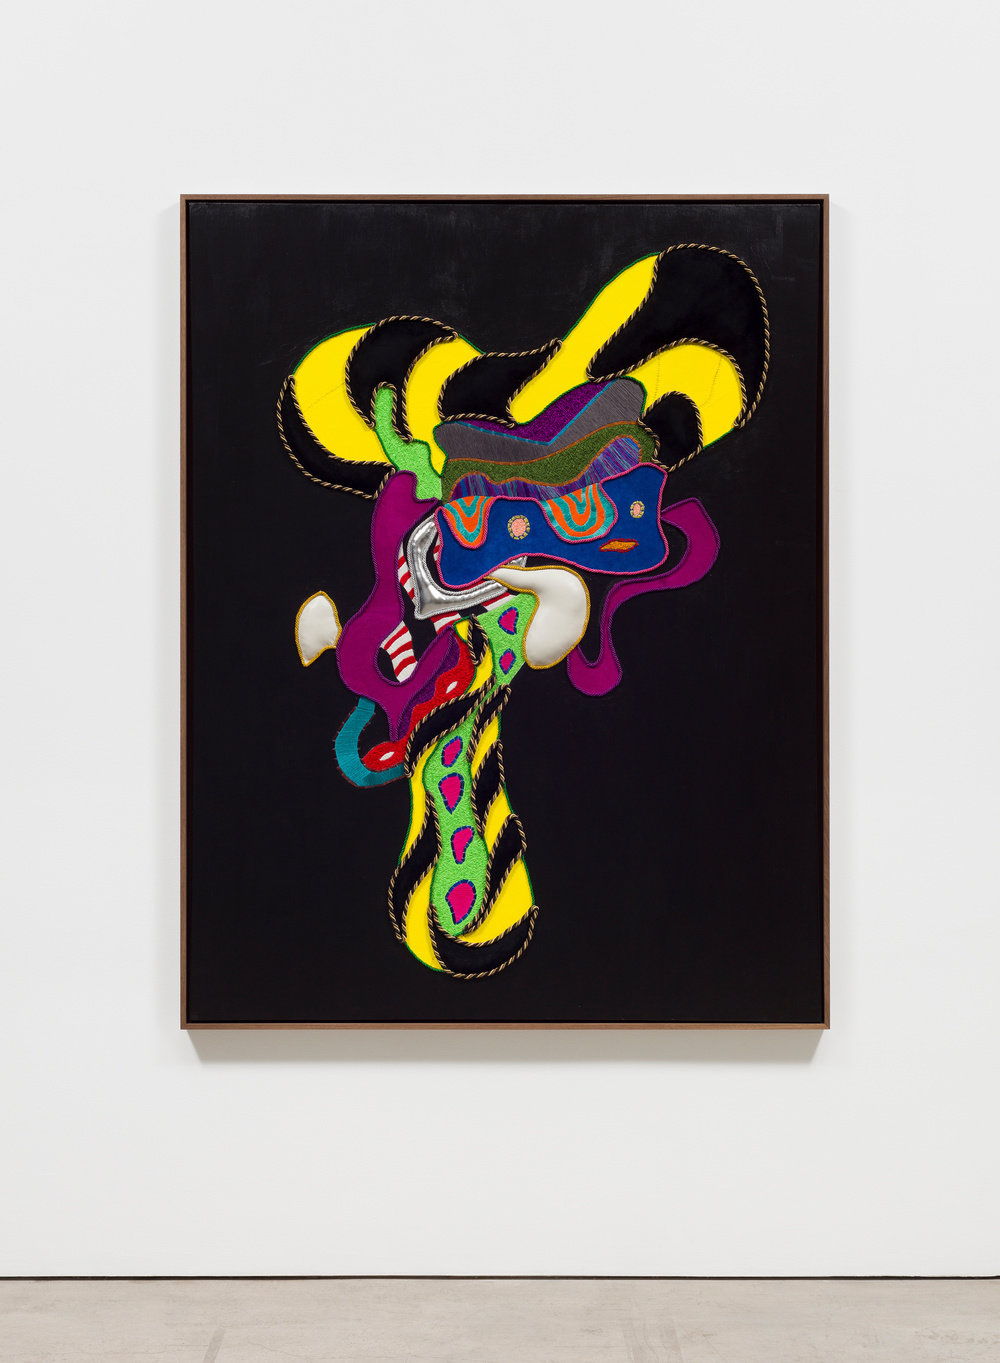 Cox, shadow taser, 2019, thread, acrylic, suede, lamb leather, twisted lipcord, poly stuffing on canvas in oak frame, 73 1 2 x 57 1 2 in., 186.69 x 146.05 cm, cnon 61.484